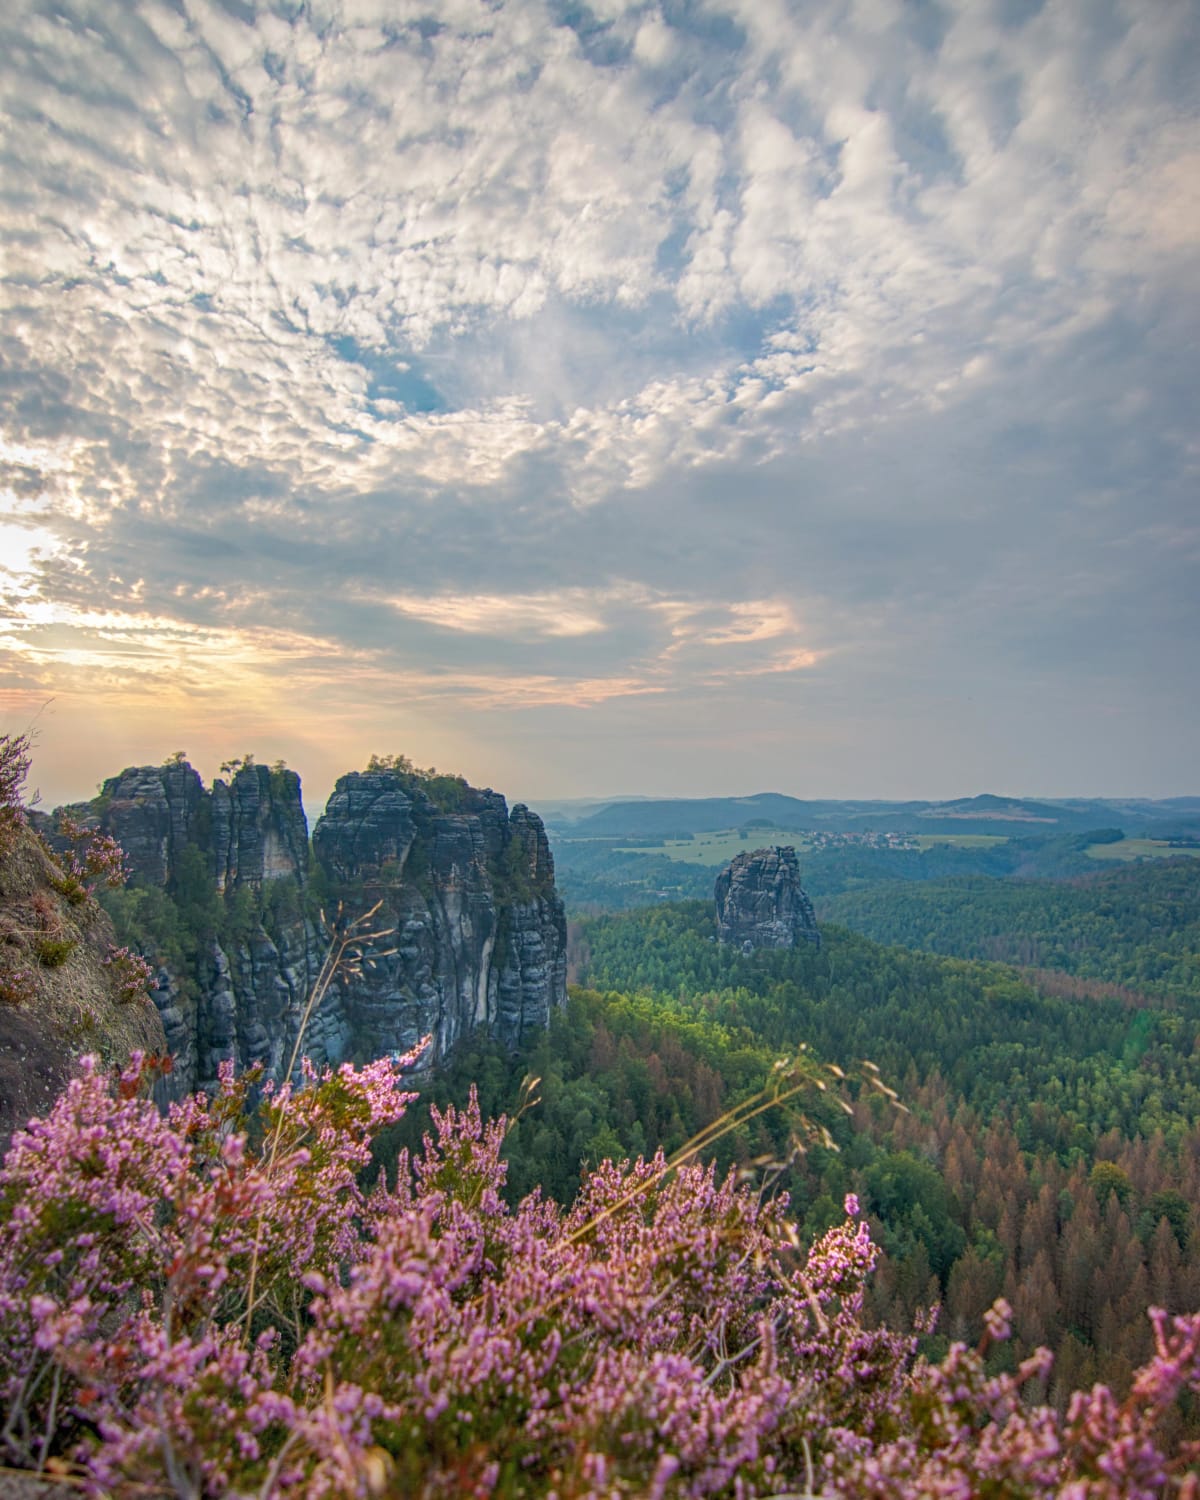 Heather overlooking Elbe Sandstone Mountains in Saxony, Germany